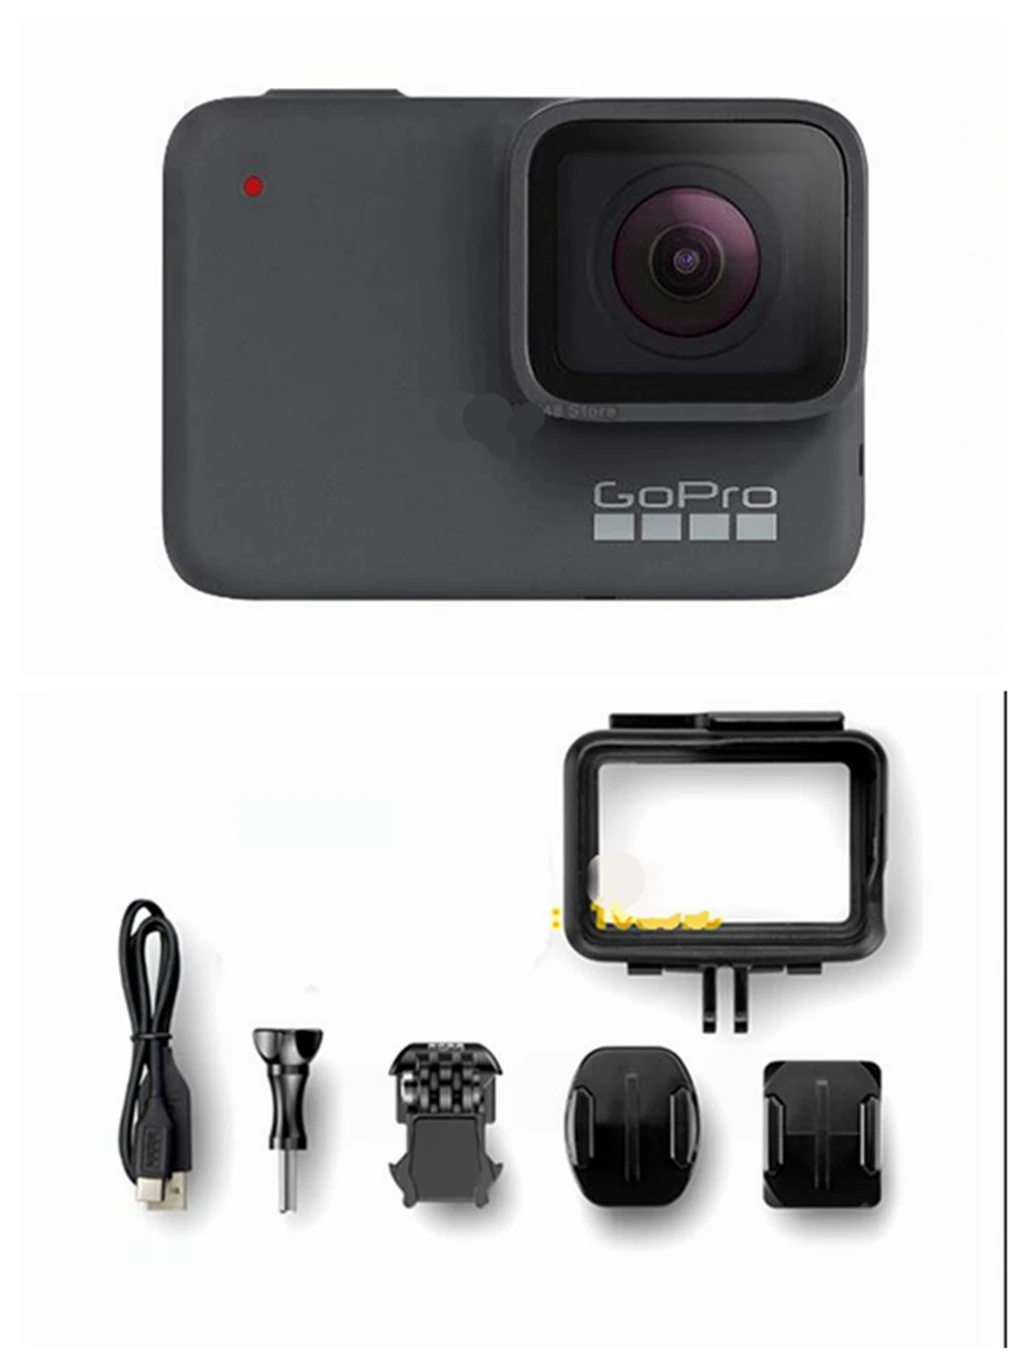 Hero 7 silver gopro Is the